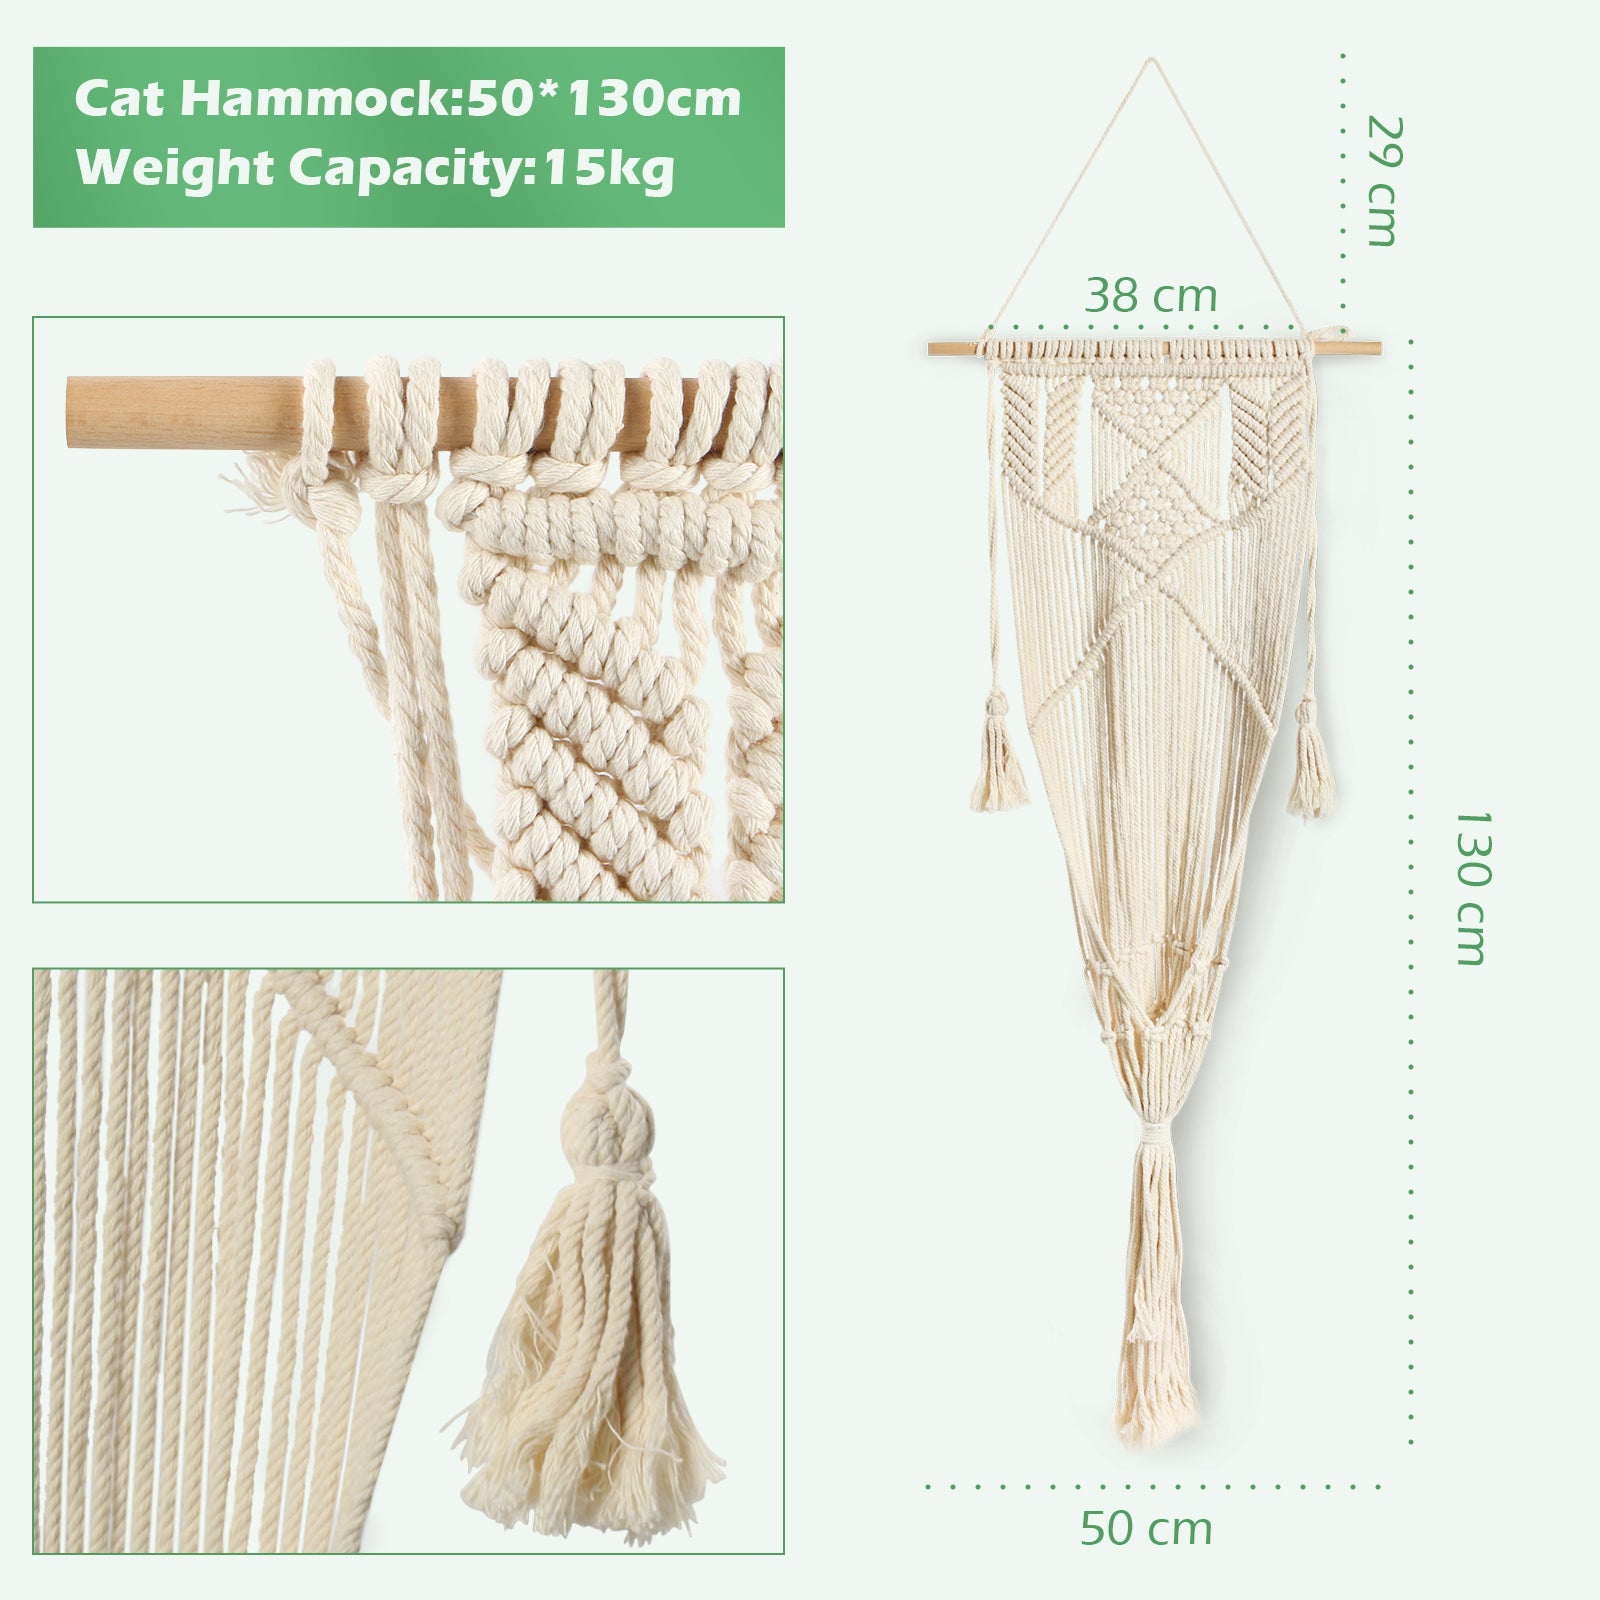 Todeco-Cat-Hammock-Tapestry-Swing-Bed-Macrame-Cotton-Rope-Load-Capacity-15kg-50-x-130-cm-Cat-Mat-Not-Included-Bohemian